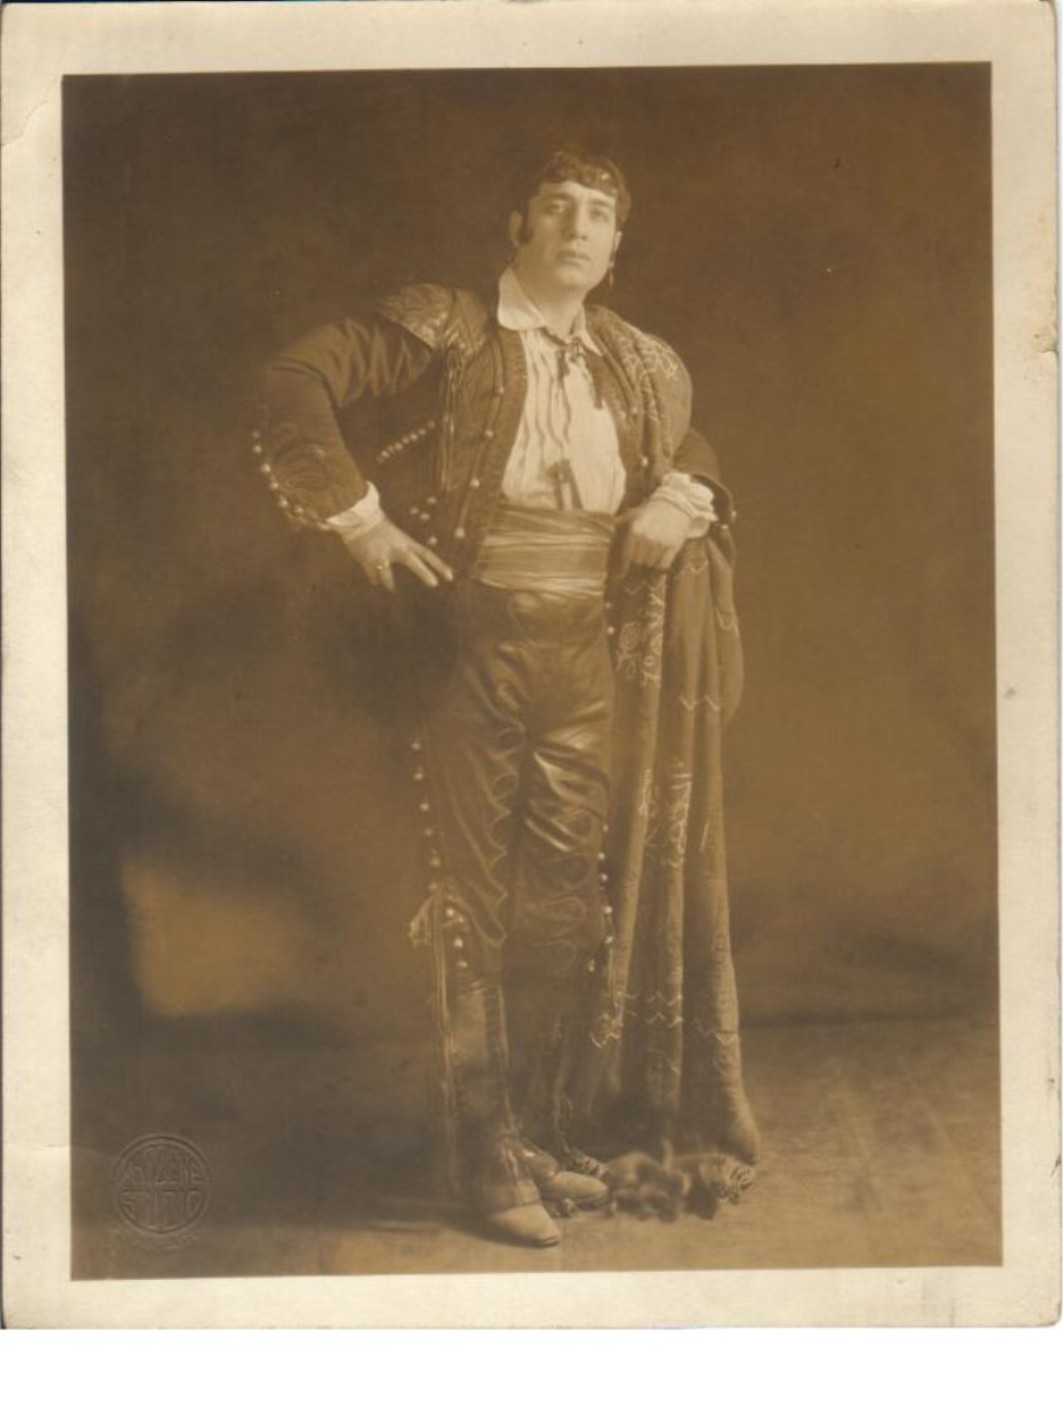 Picture of Lucien Muratore as José